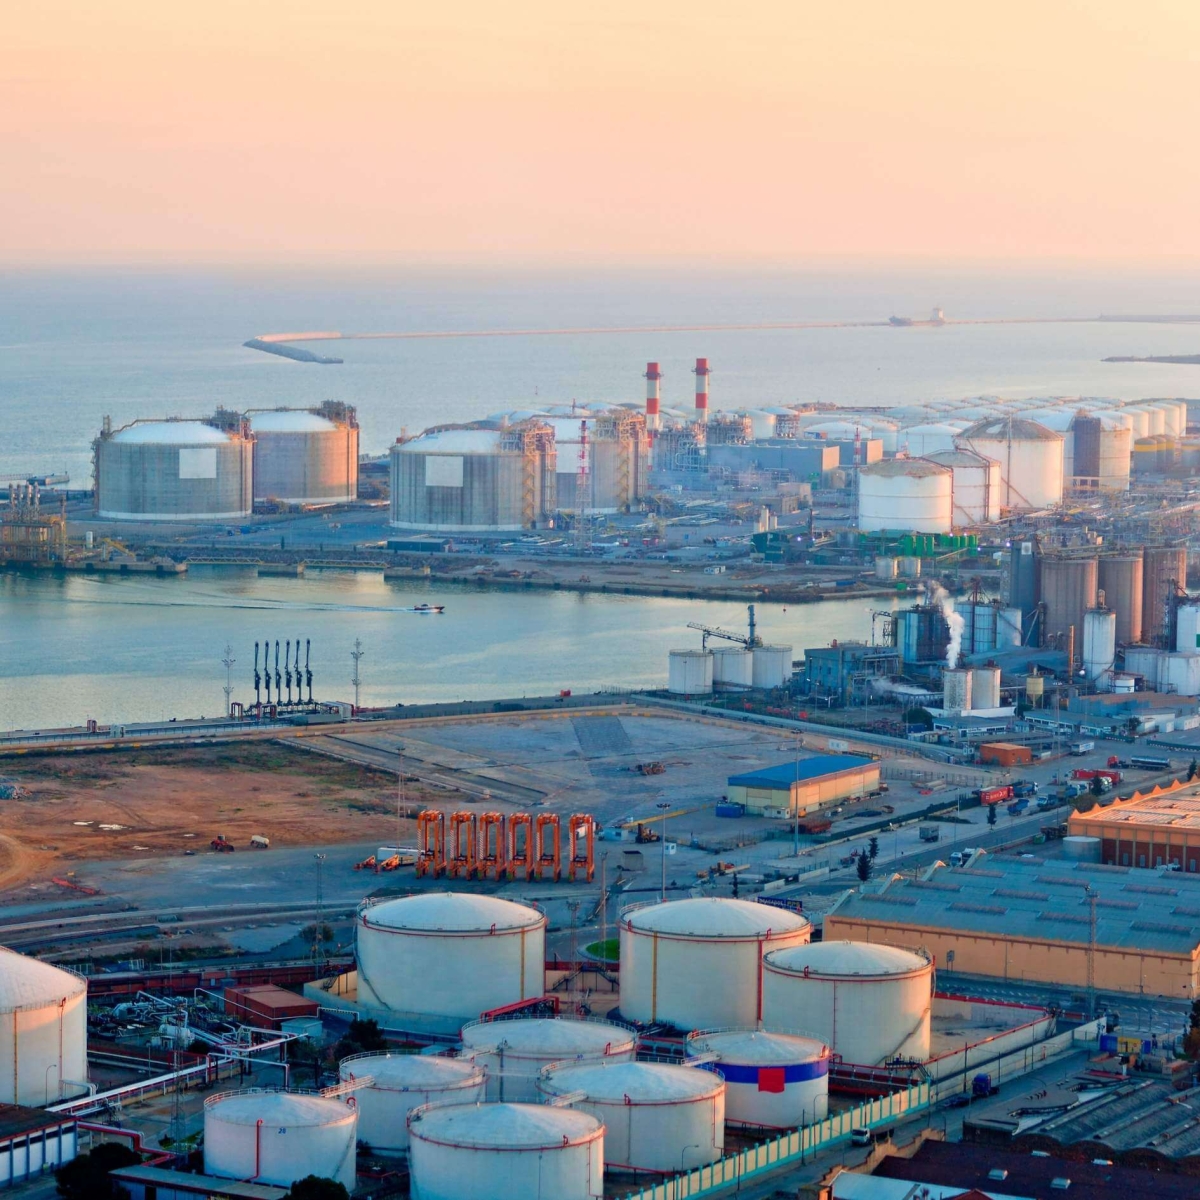 LNG Tanks at the Port of Barcelona nowadays